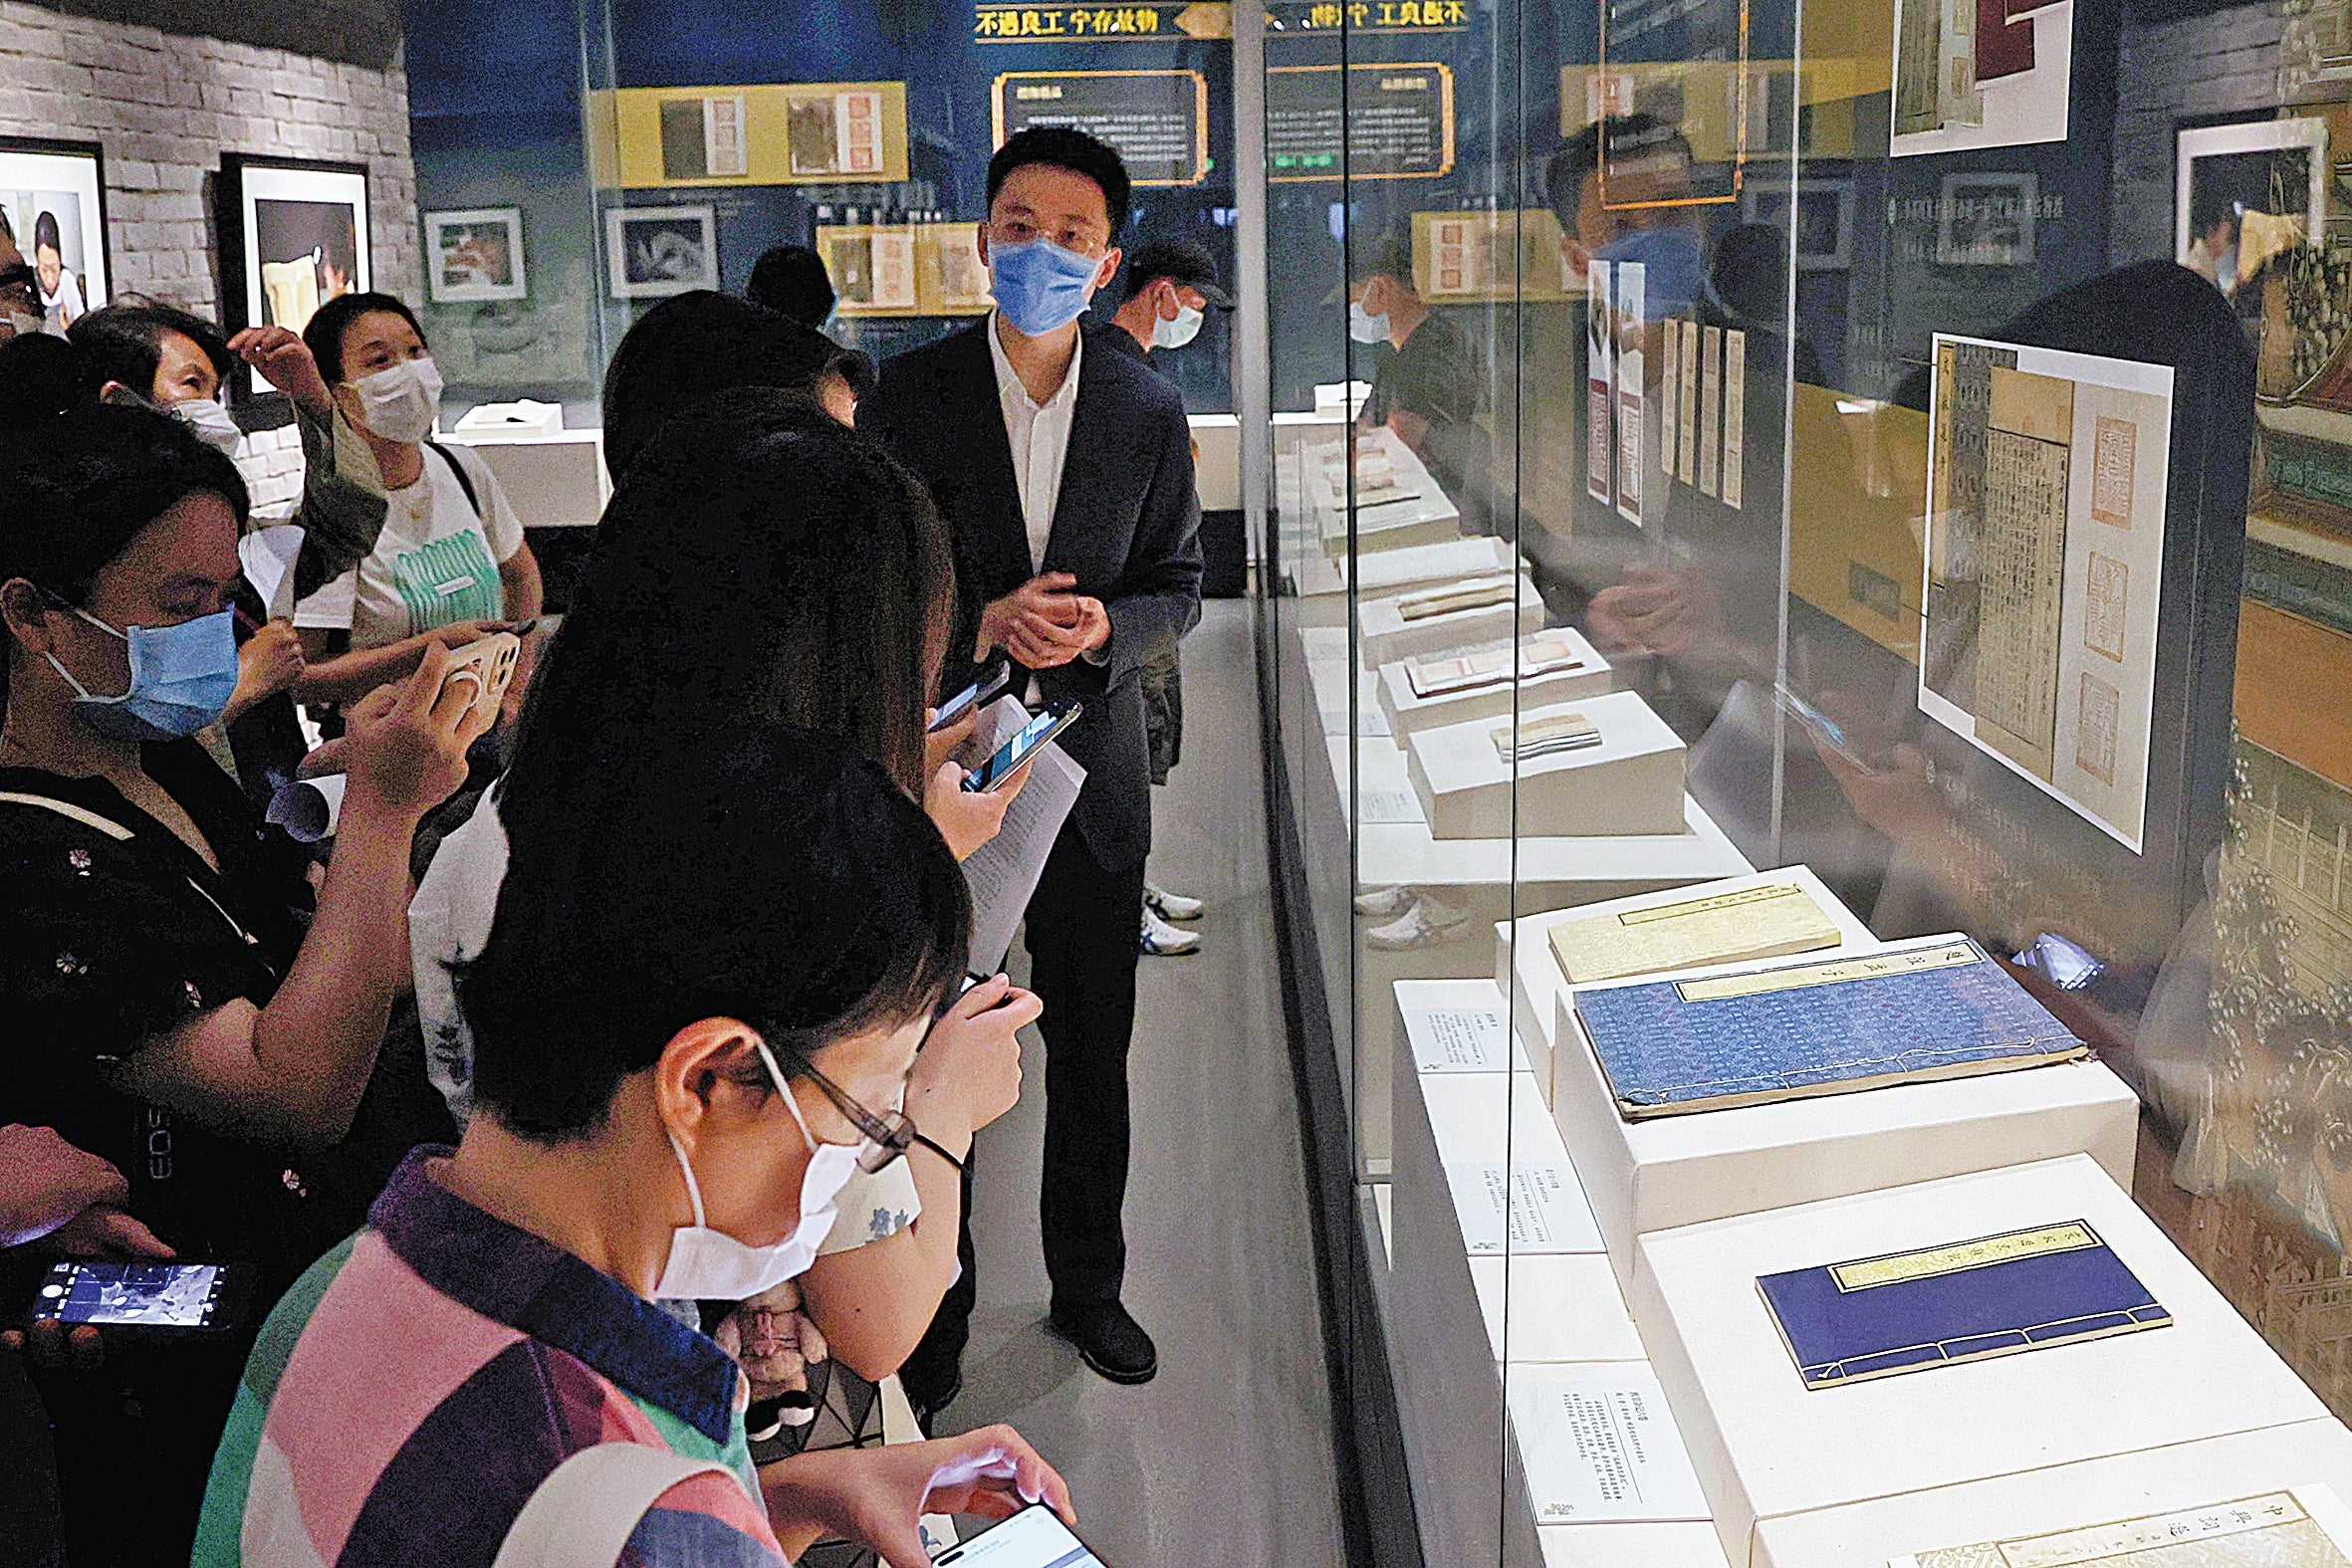 A guide at the National Library of China introduces the restoration process for copies of Tianlu Linlang , a royal book collection of the Qing Dynasty (1644-1911), at an exhibition in Beijing